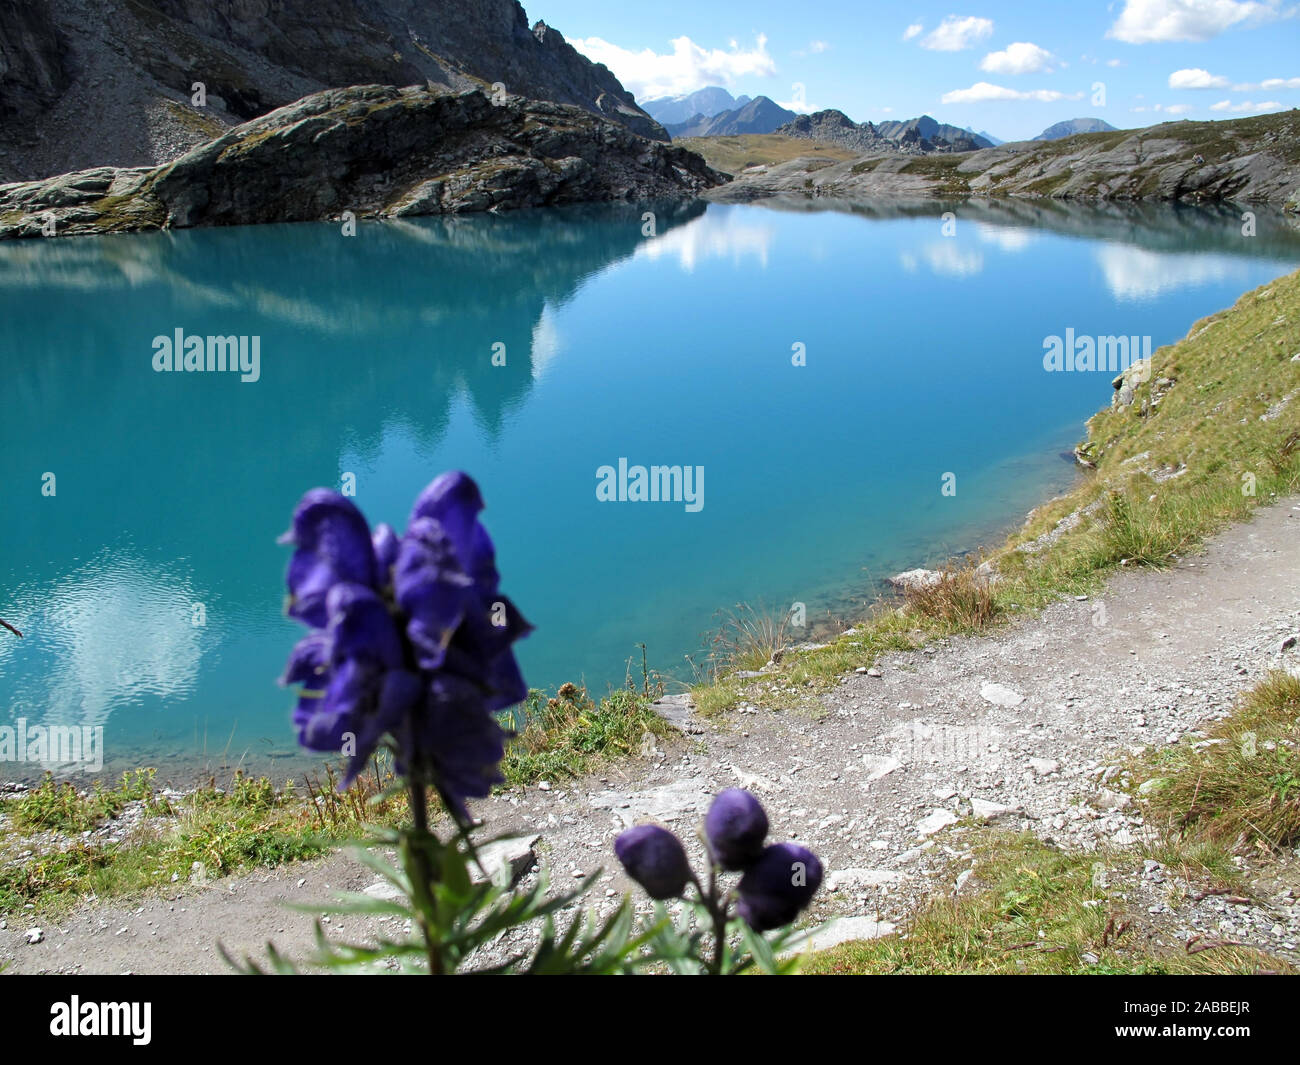 Grey mountain peaks, cotton clouds and a deep blue sky are reflected in the sunny, turquoise Alpine lake, next to the blue aconite, monkshood flower Stock Photo